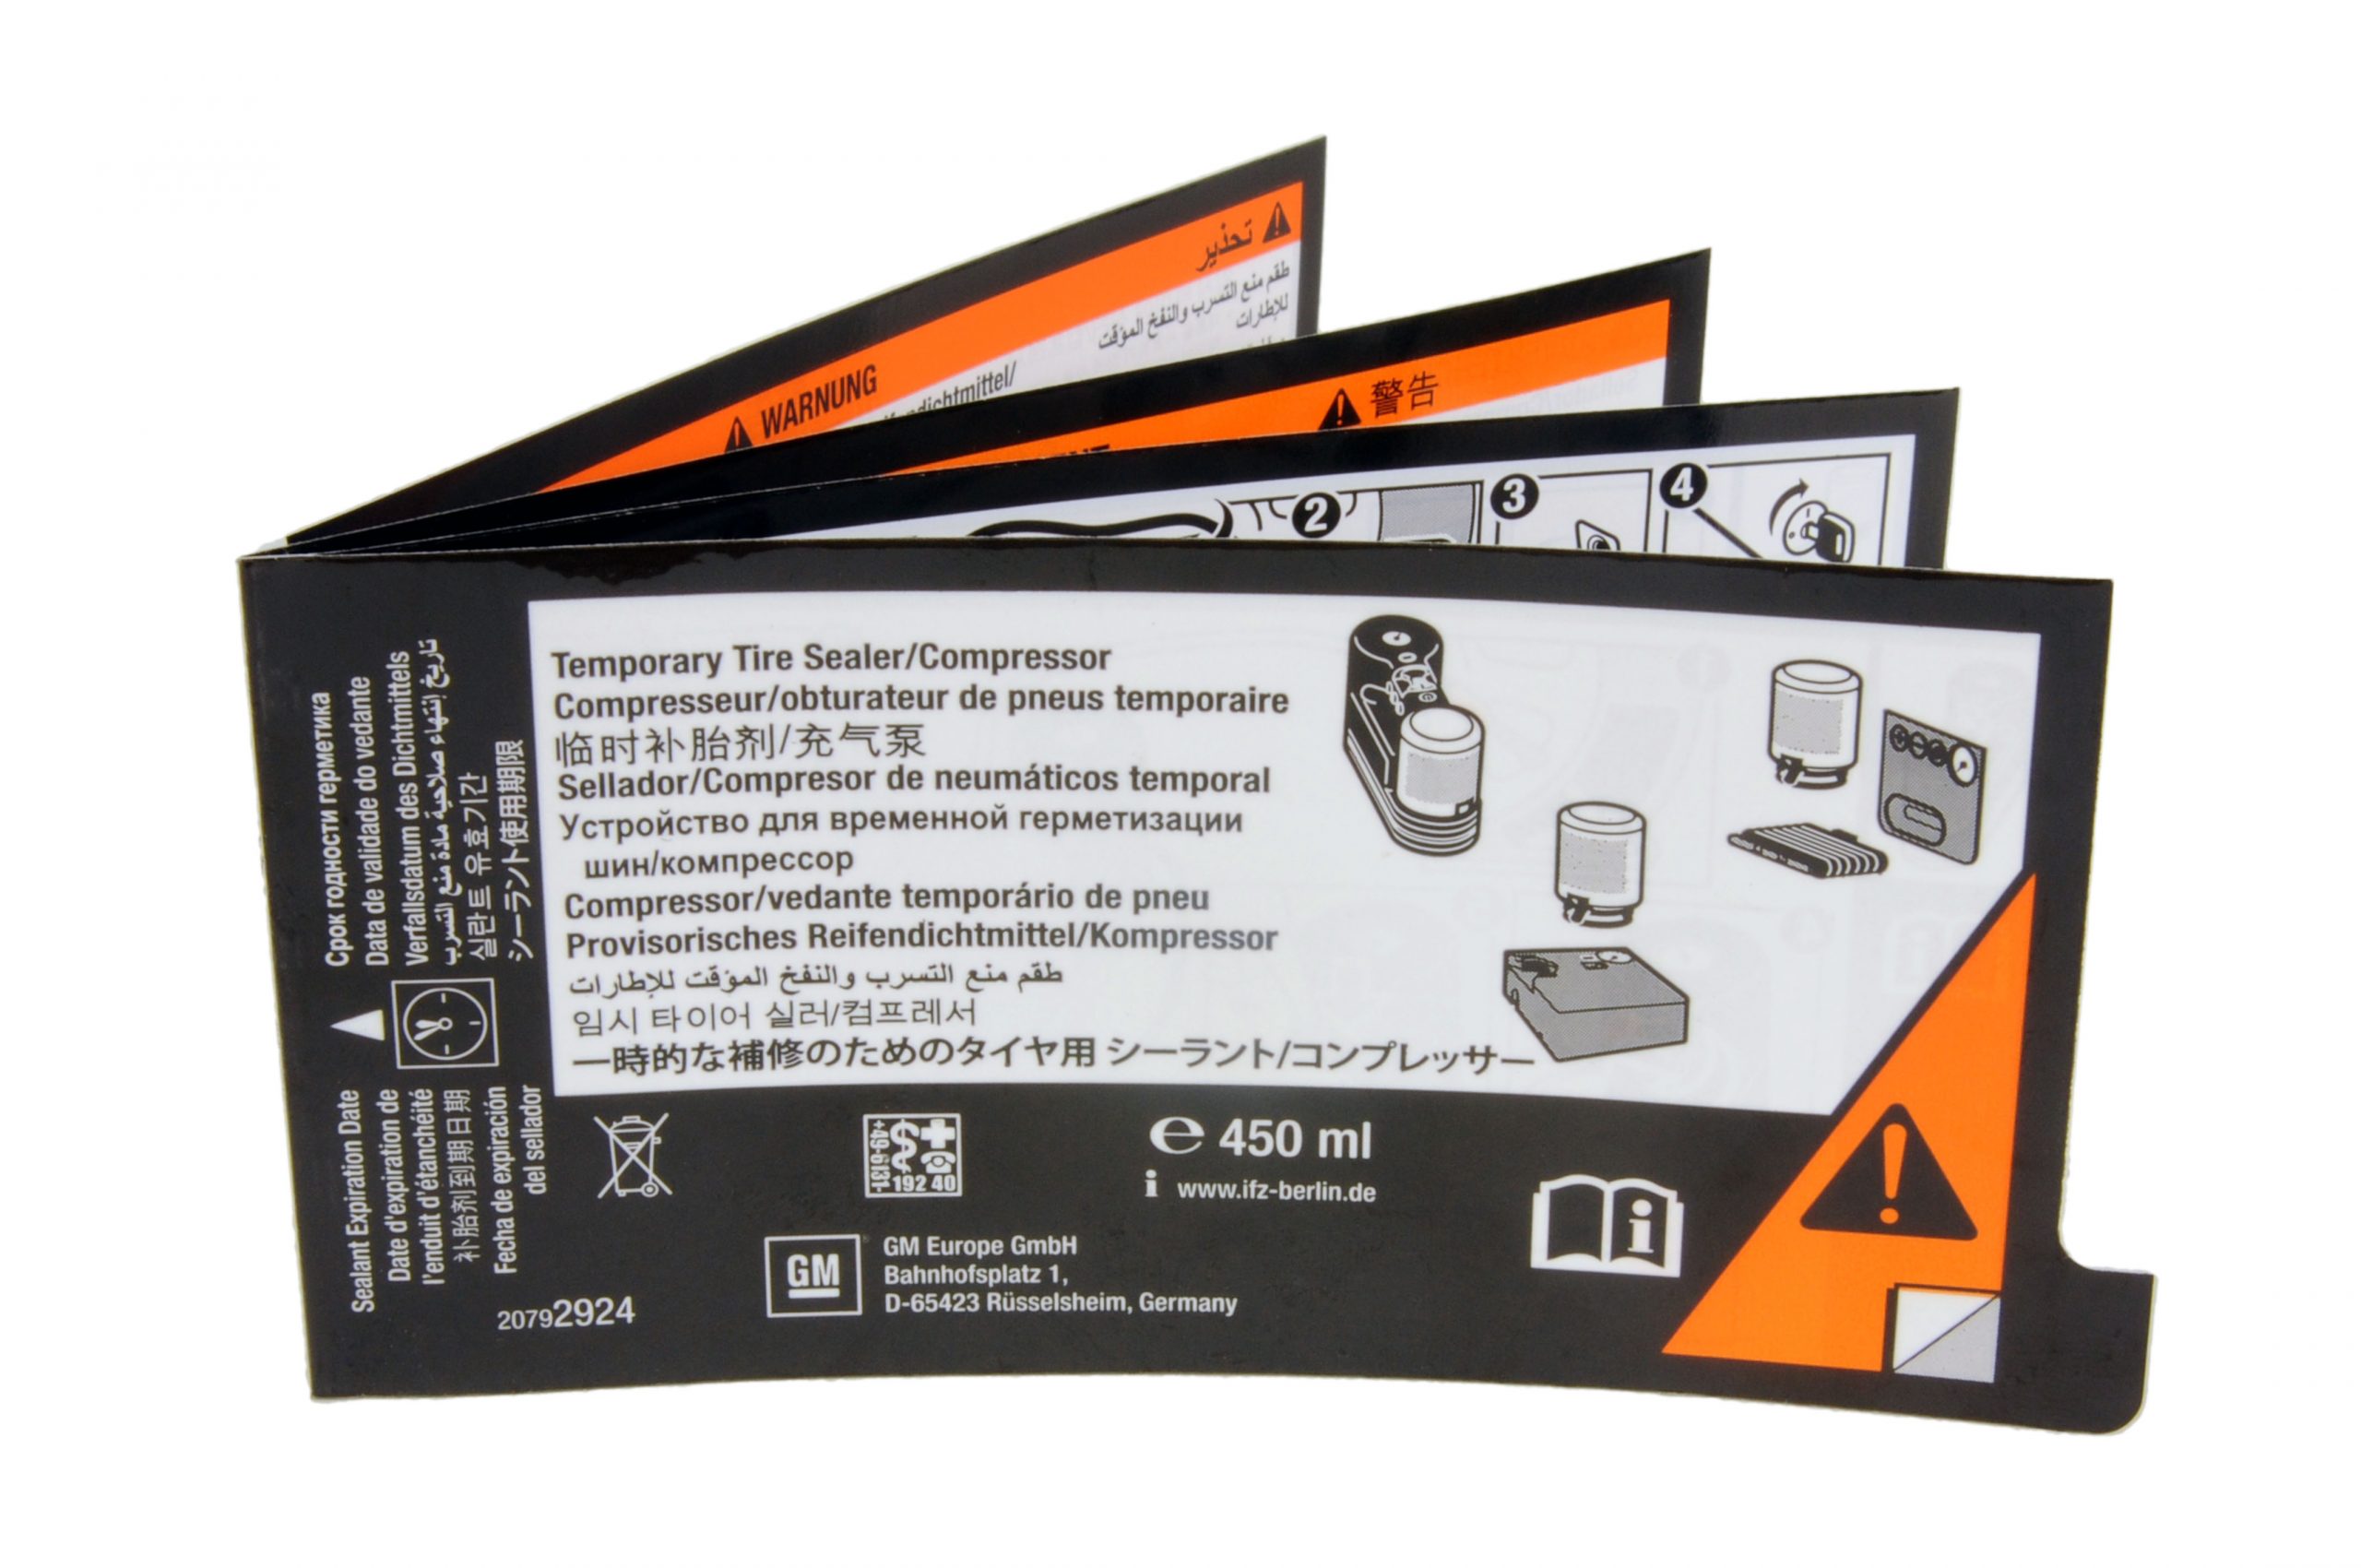 Label packaging focused on safety